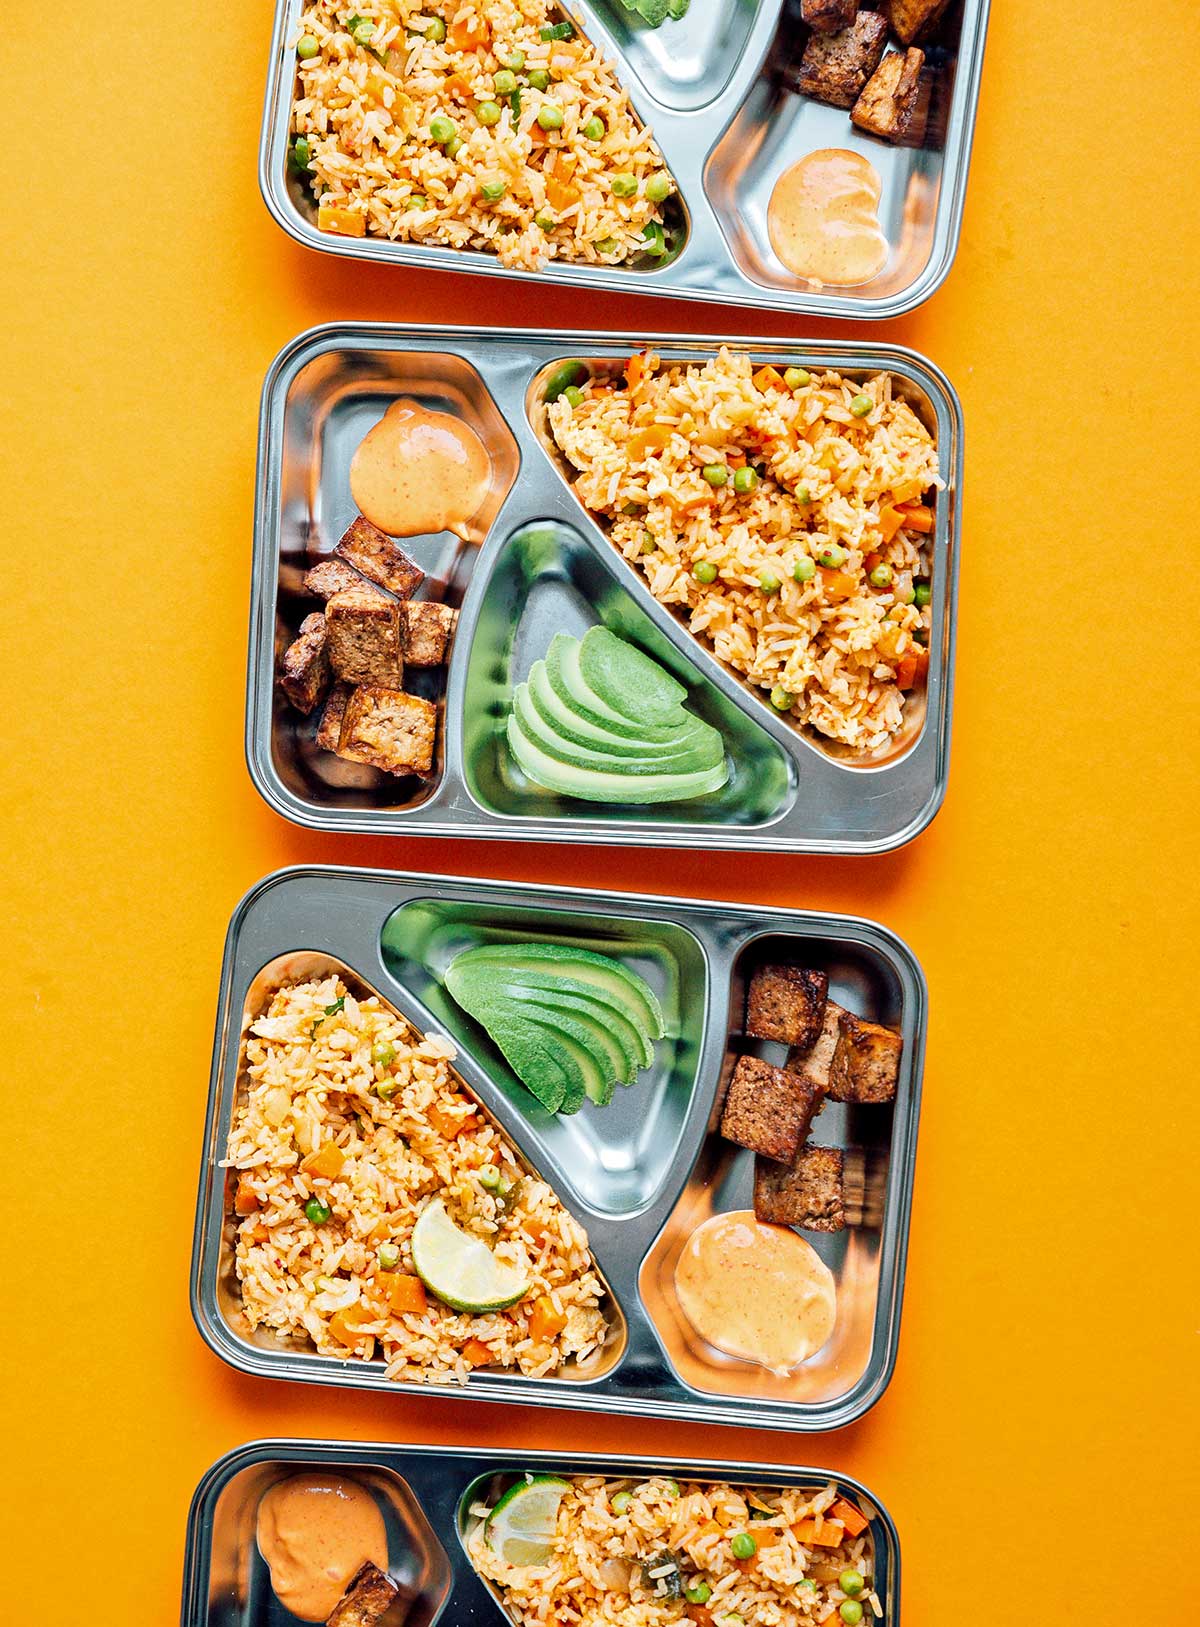 Four meal prep containers filled with kimchi fried rice, tofu, and avocado slices on a yellow background